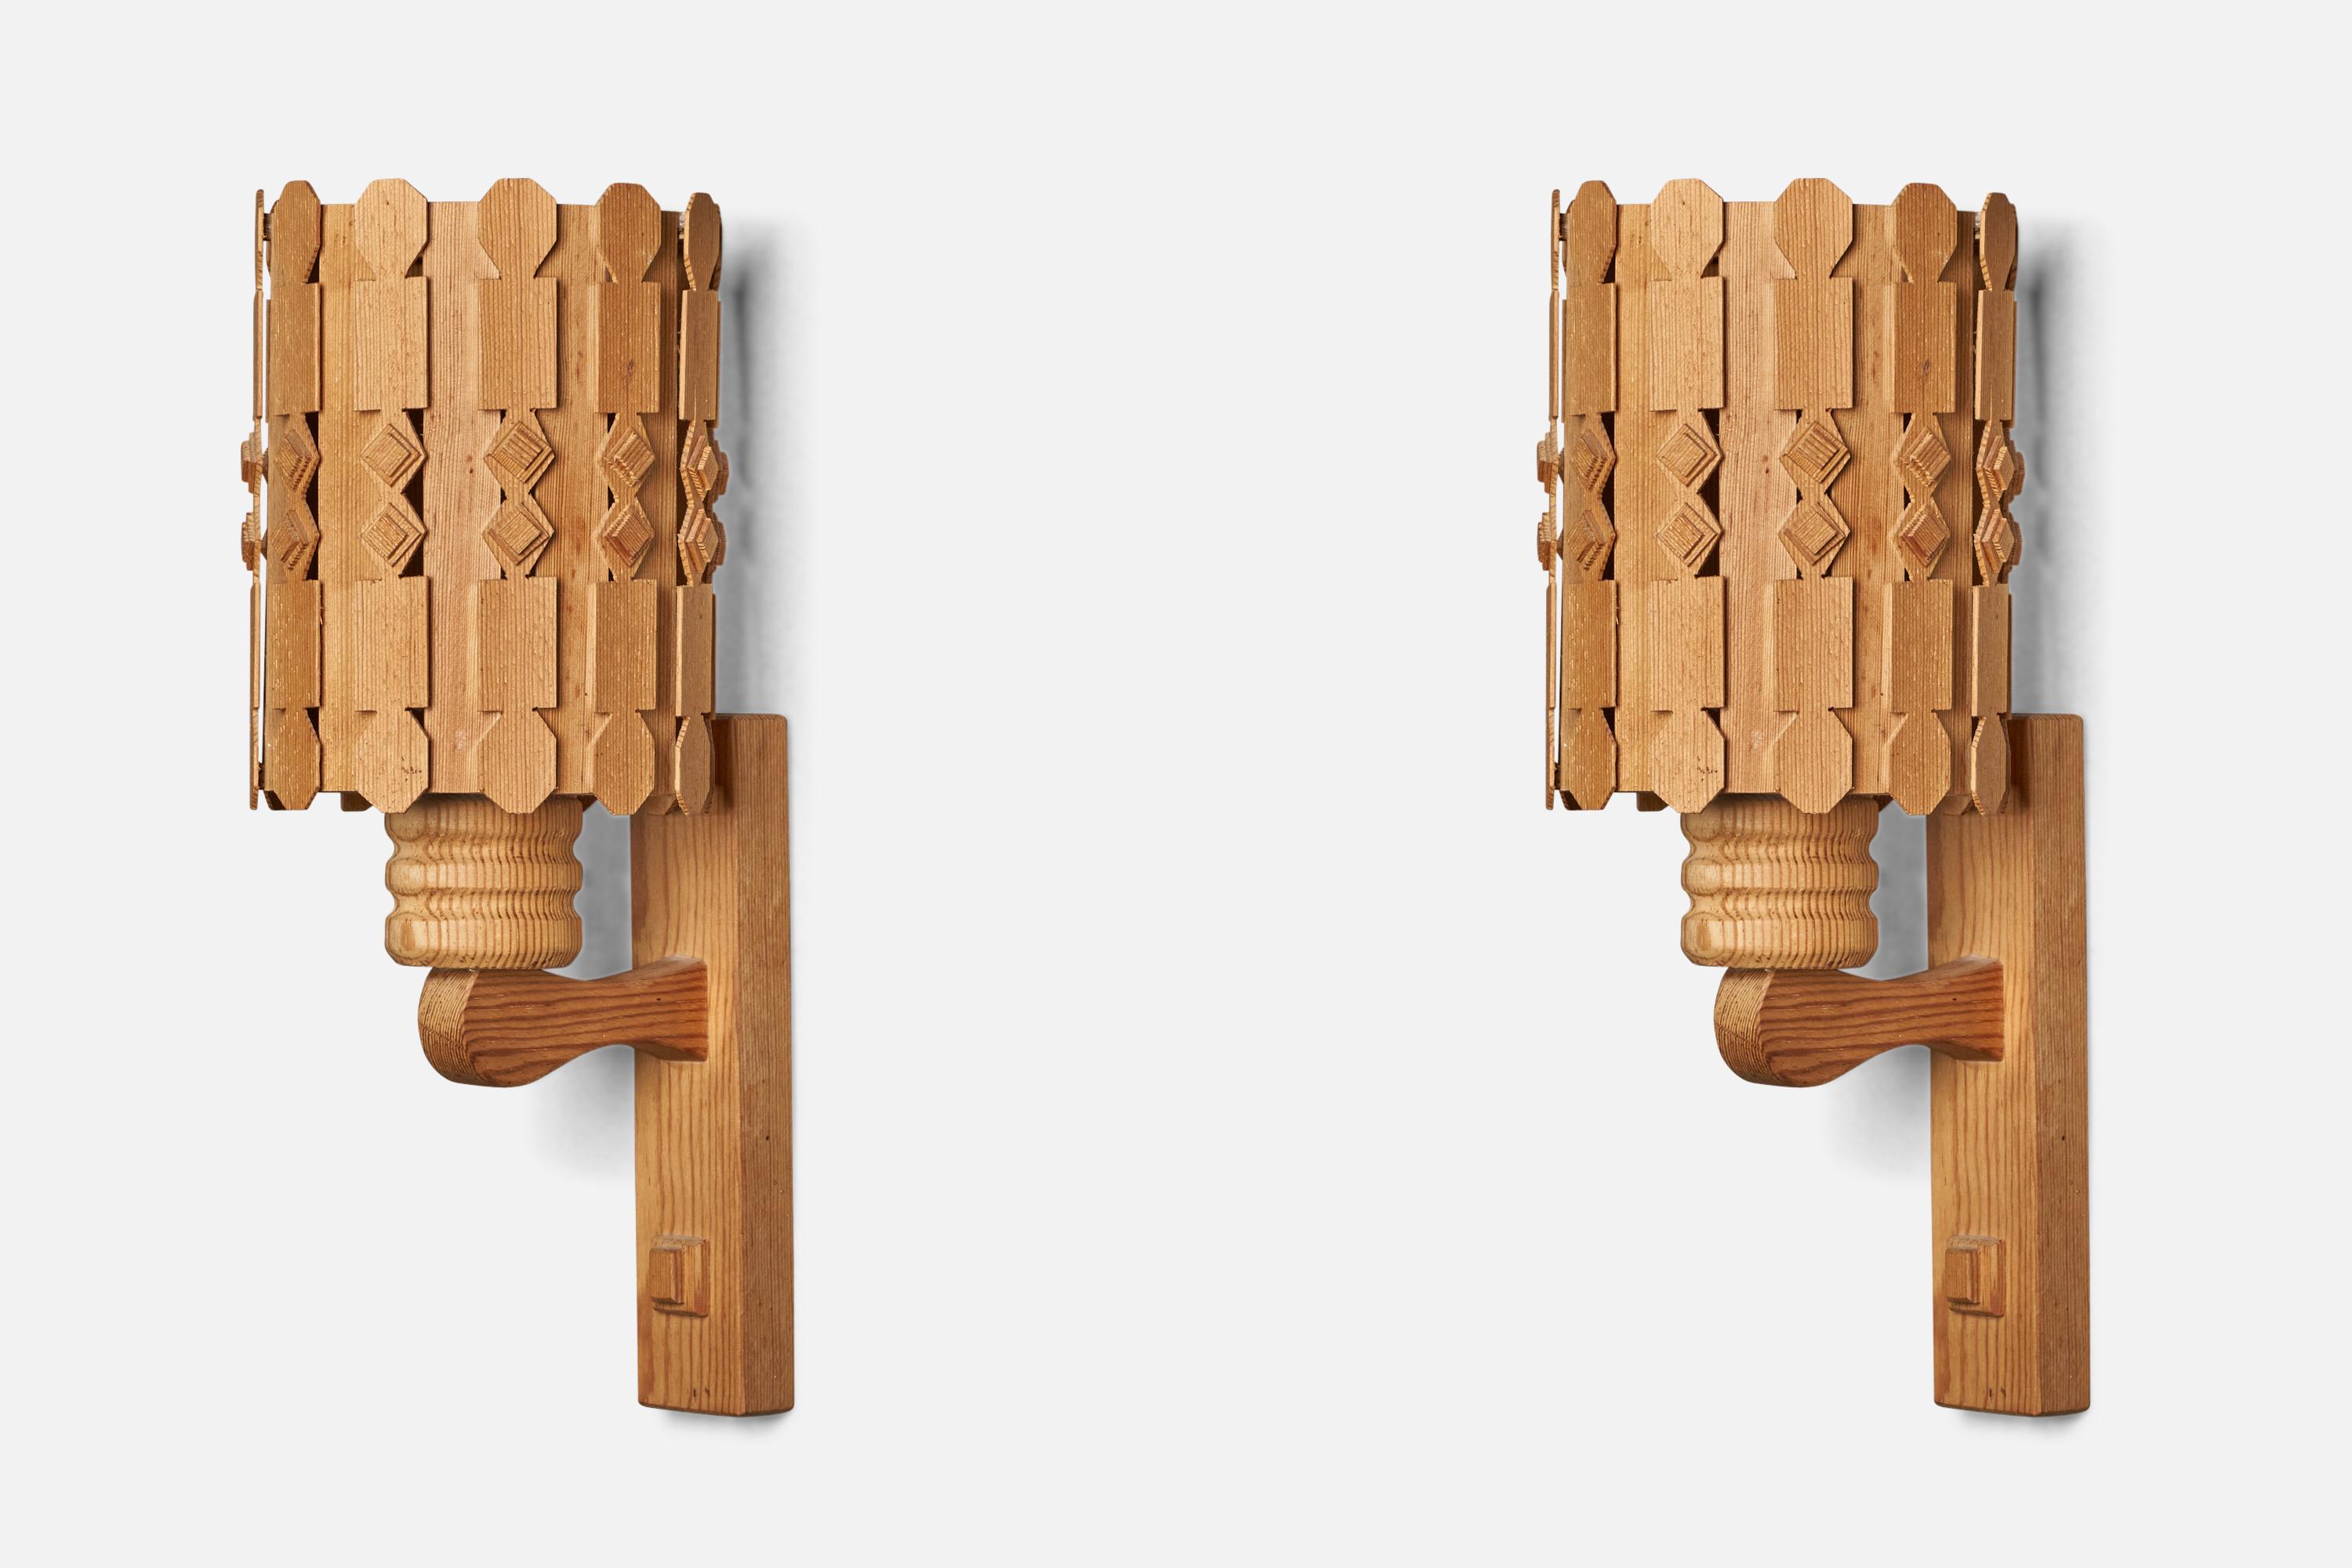 A pair of pine and oak wall lights designed and produced in Denmark, c. 1960s.

Overall Dimensions (inches): 13.6” H x 5” W x 6.25” D
Bulb Specifications: E-26 Bulb
Number of Sockets: 1